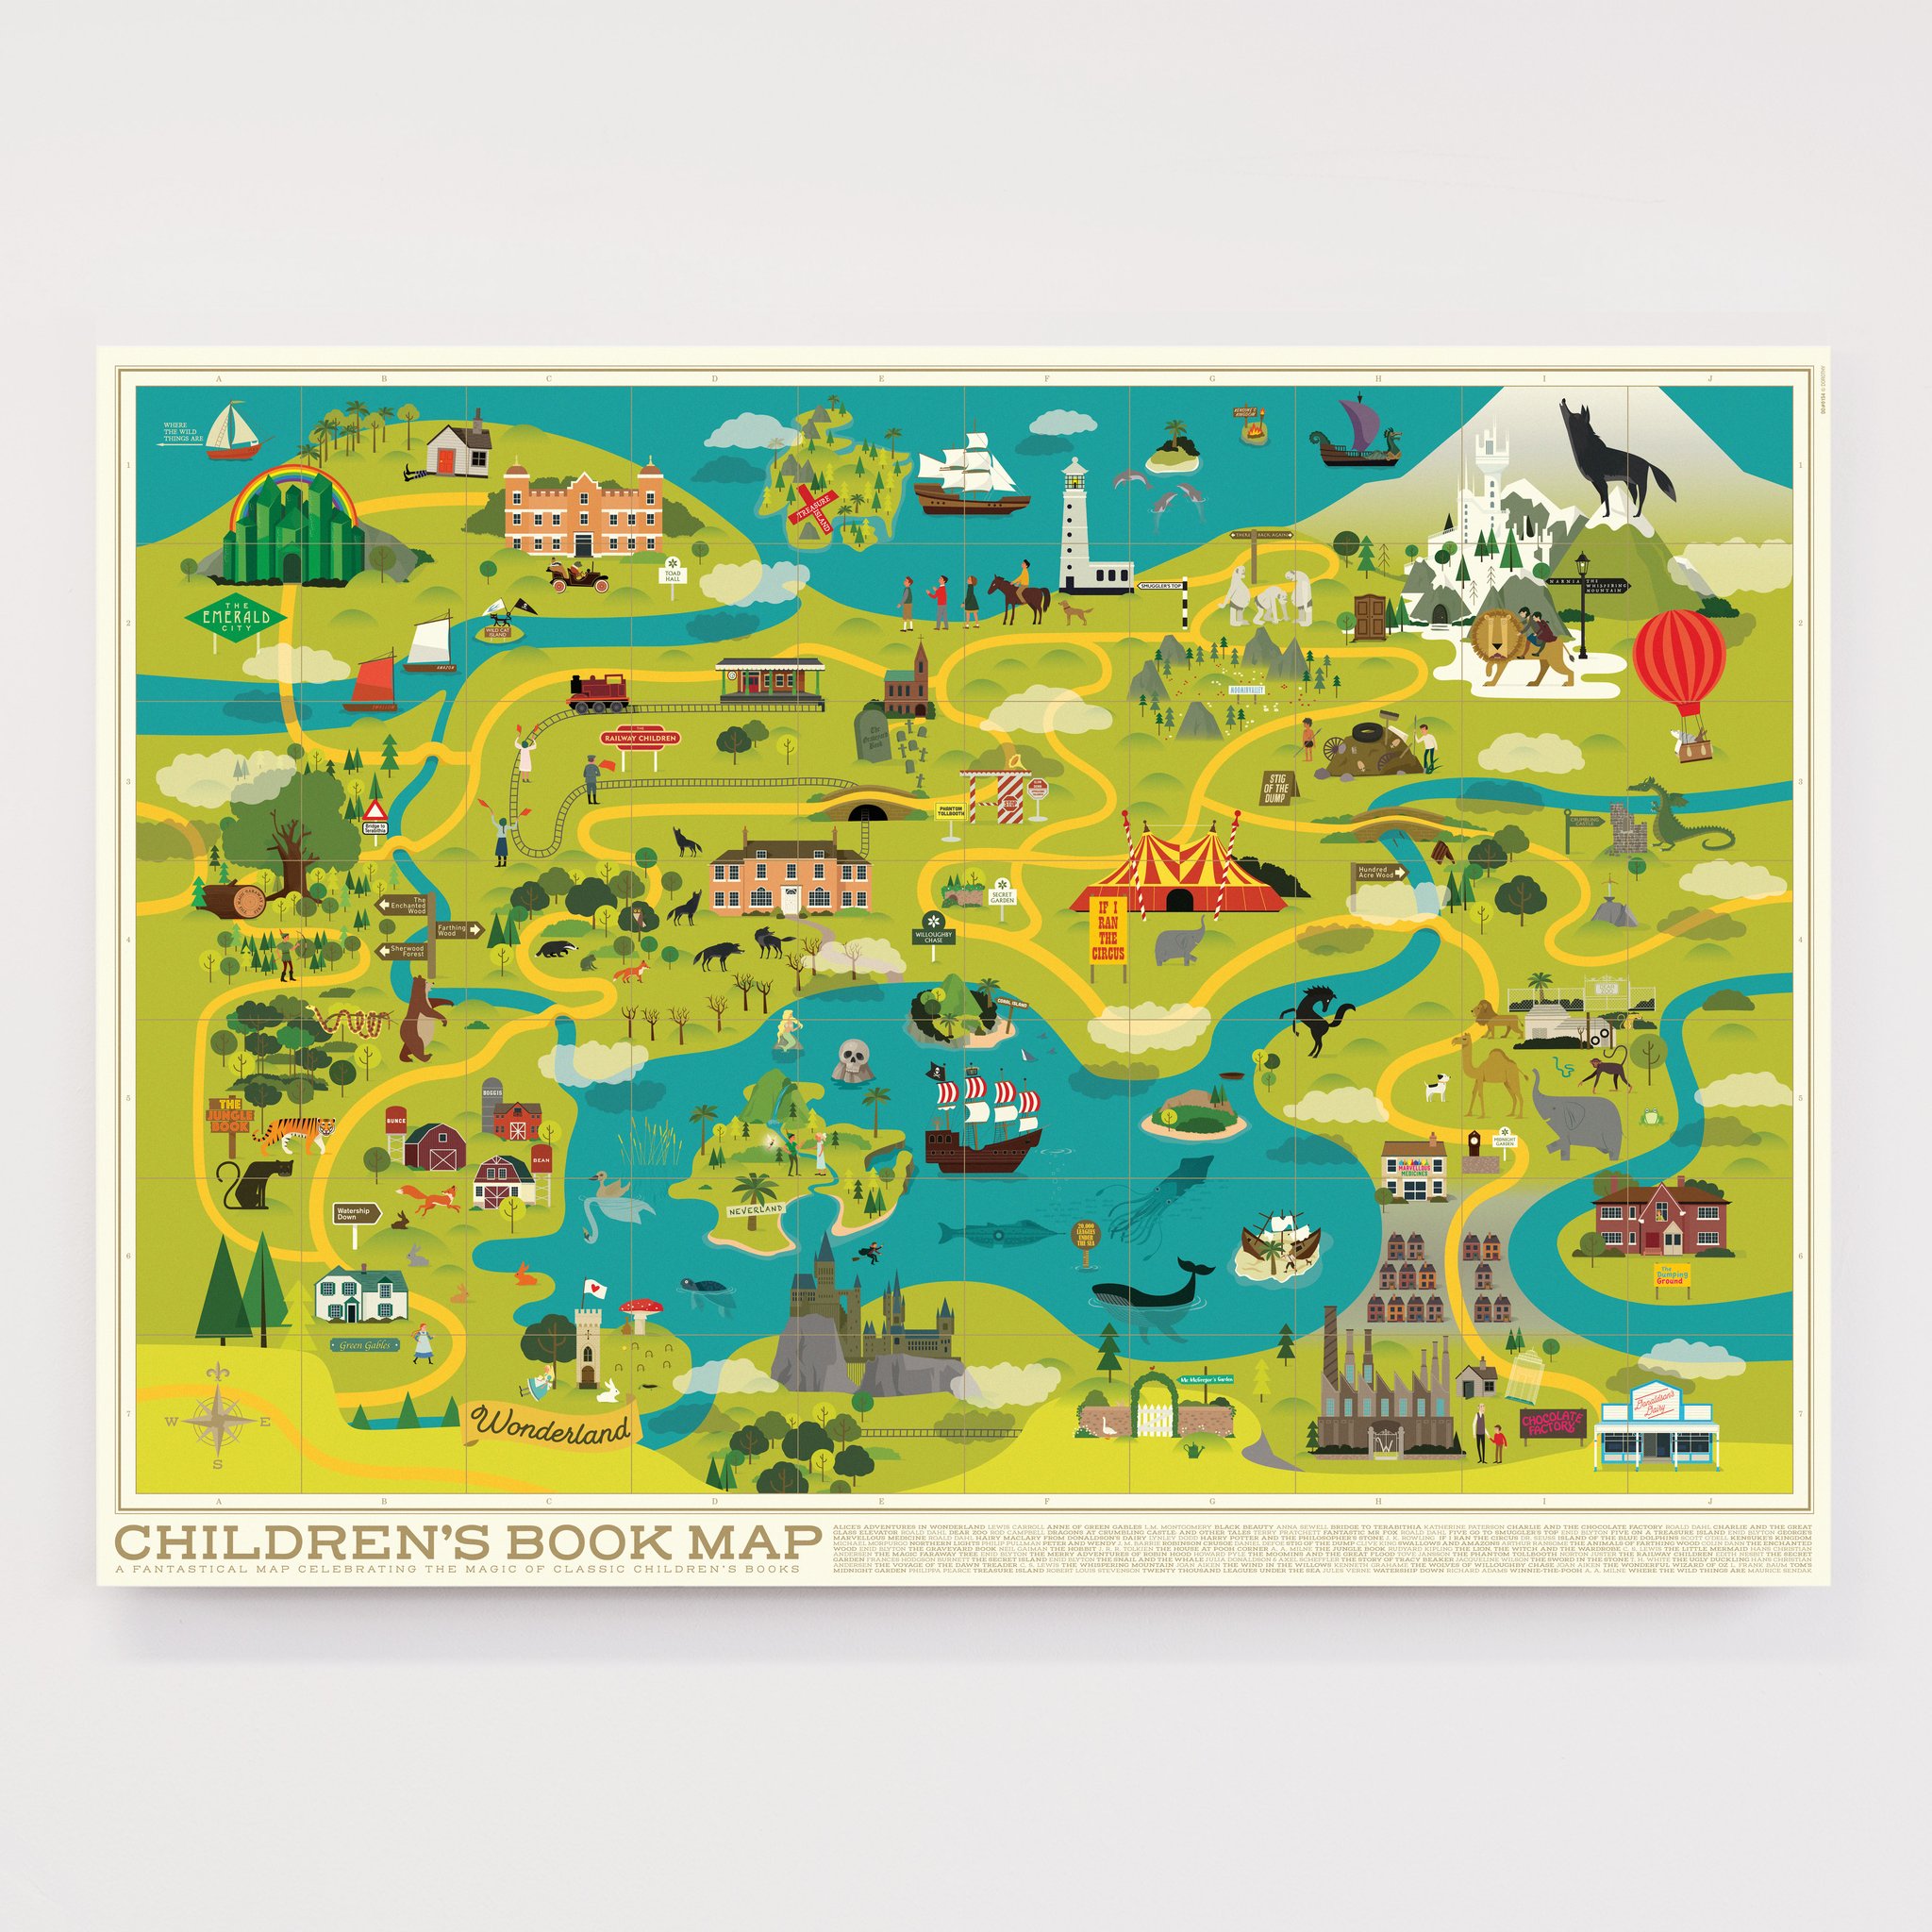 A detailed views of the Children's Book Map